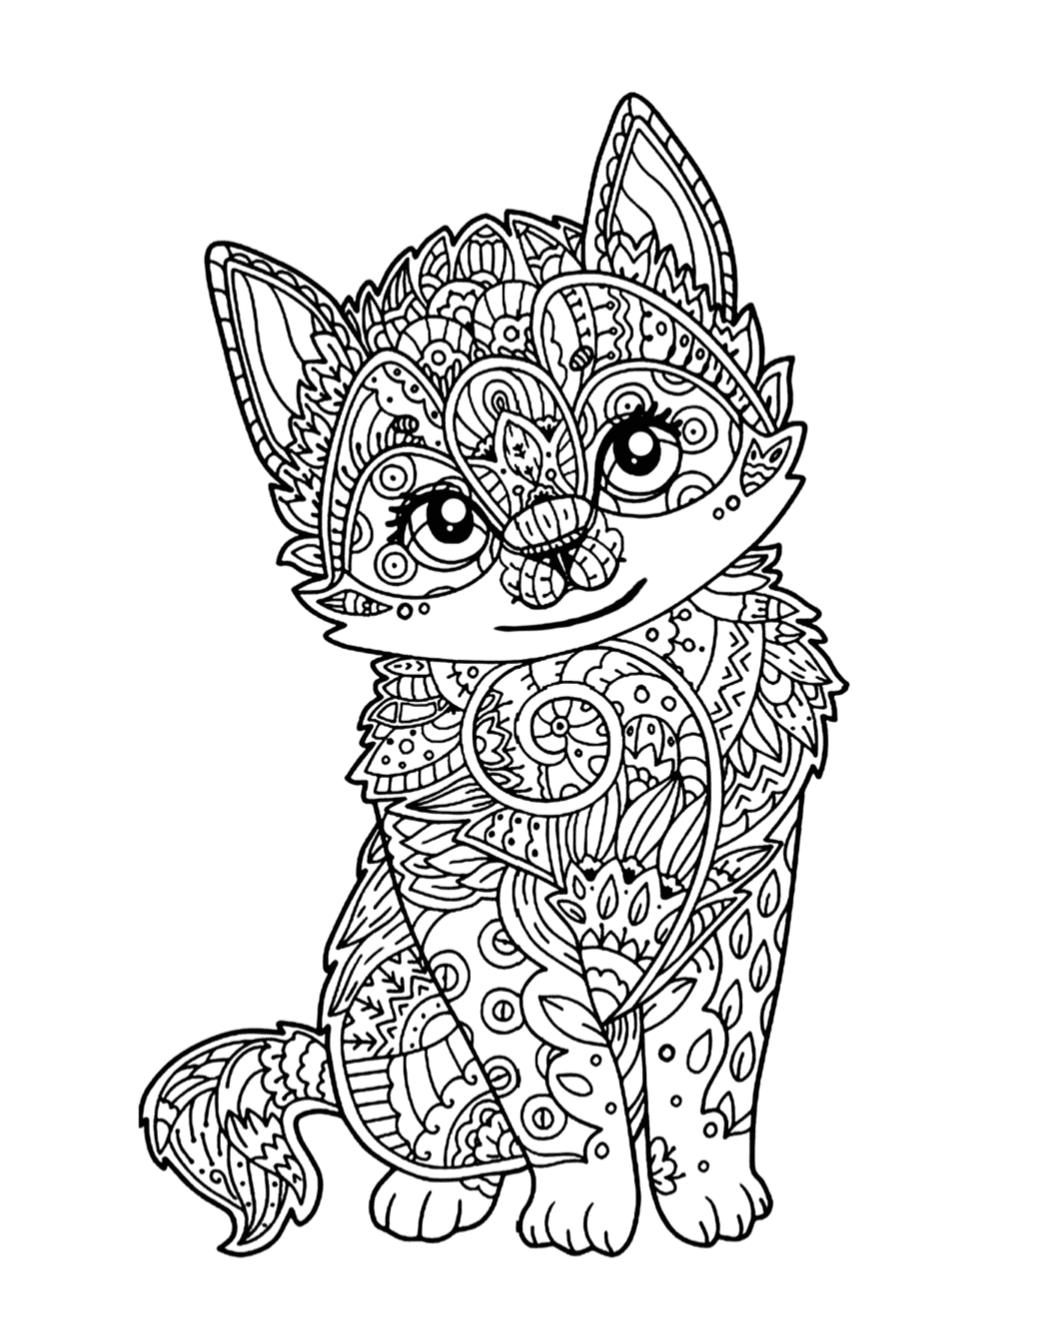 Cute kitten coloring page free download â cat cave co